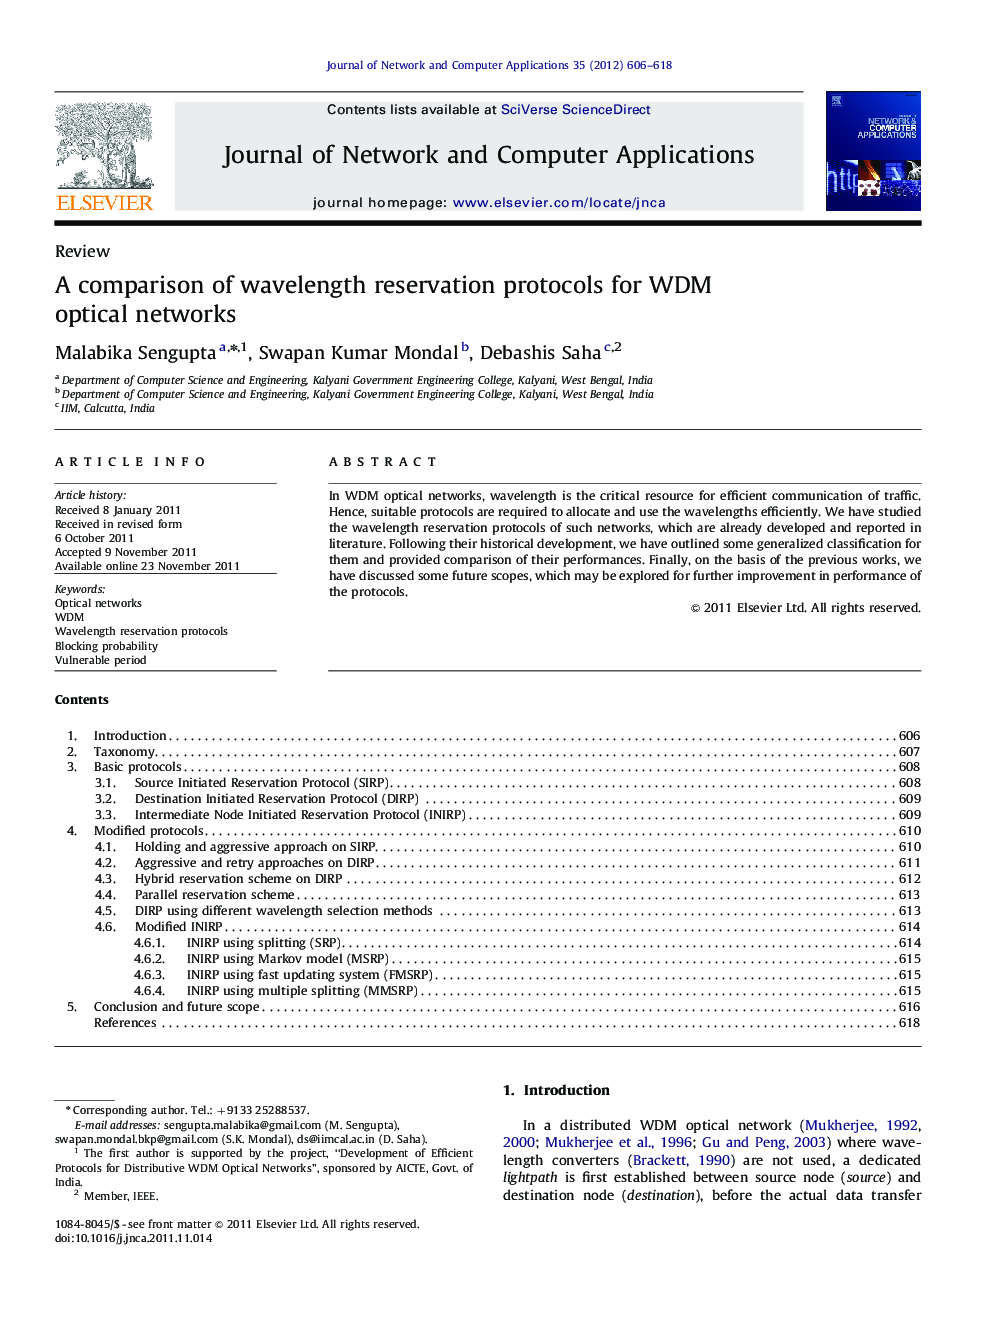 A comparison of wavelength reservation protocols for WDM optical networks